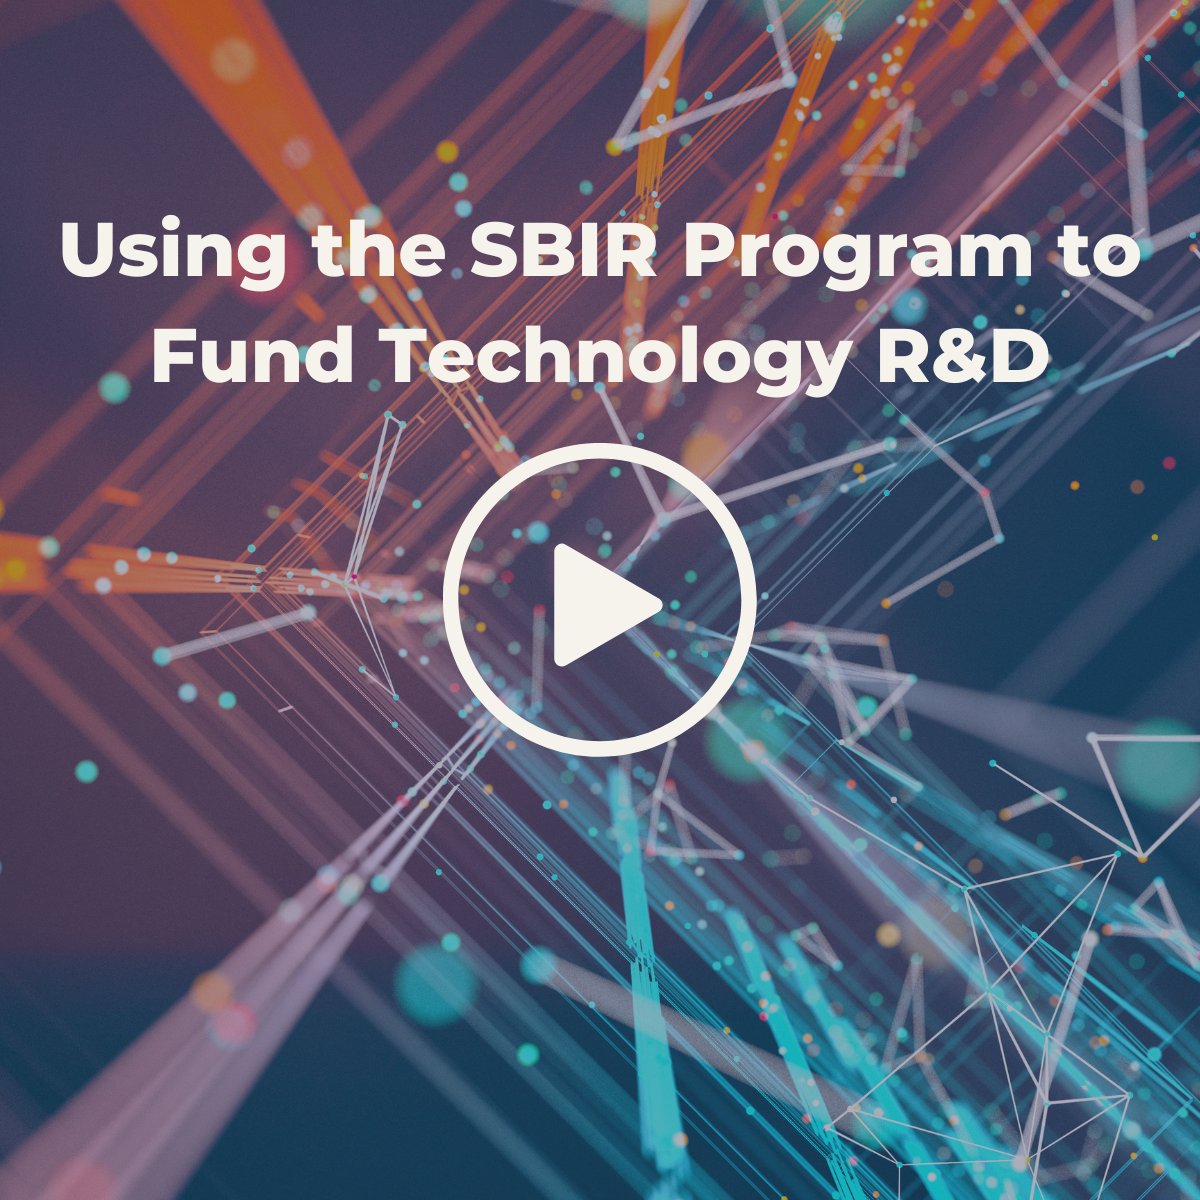 Wondering how to find sources of non-dilutive funding to grow your technology company through Federal Contracts? Watch now at 1l.ink/R5LRDTJ
#funding #researchfunding #technologyfunding #SBIR #federalcontracts